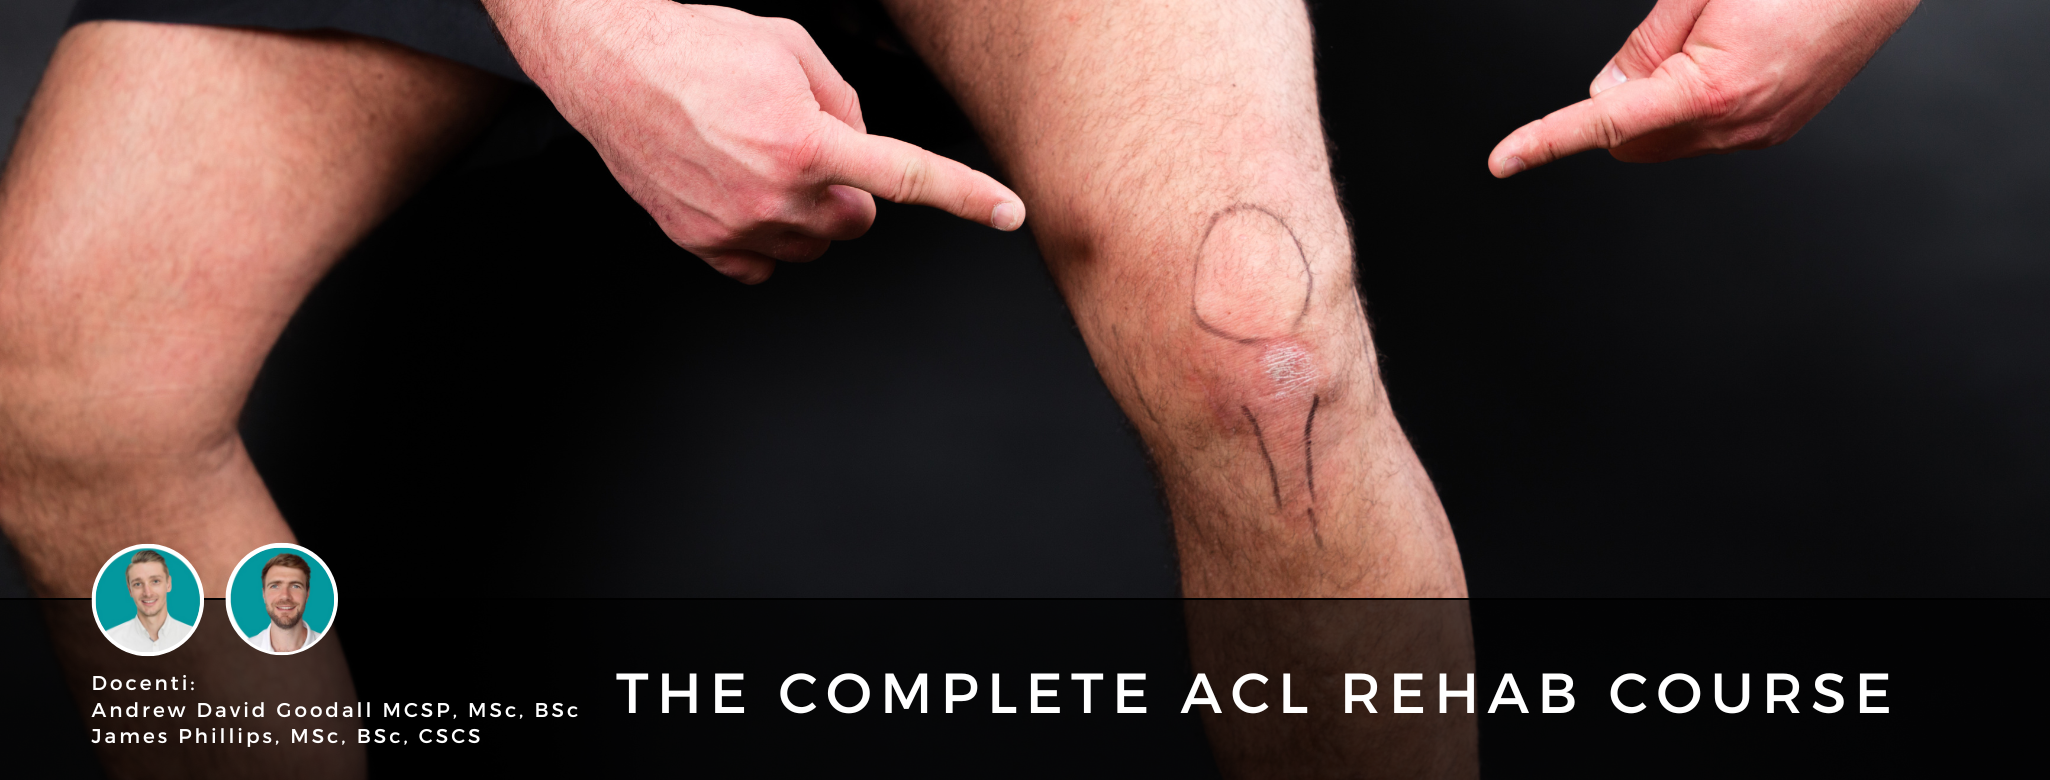 THE COMPLETE ACL REHAB COURSE